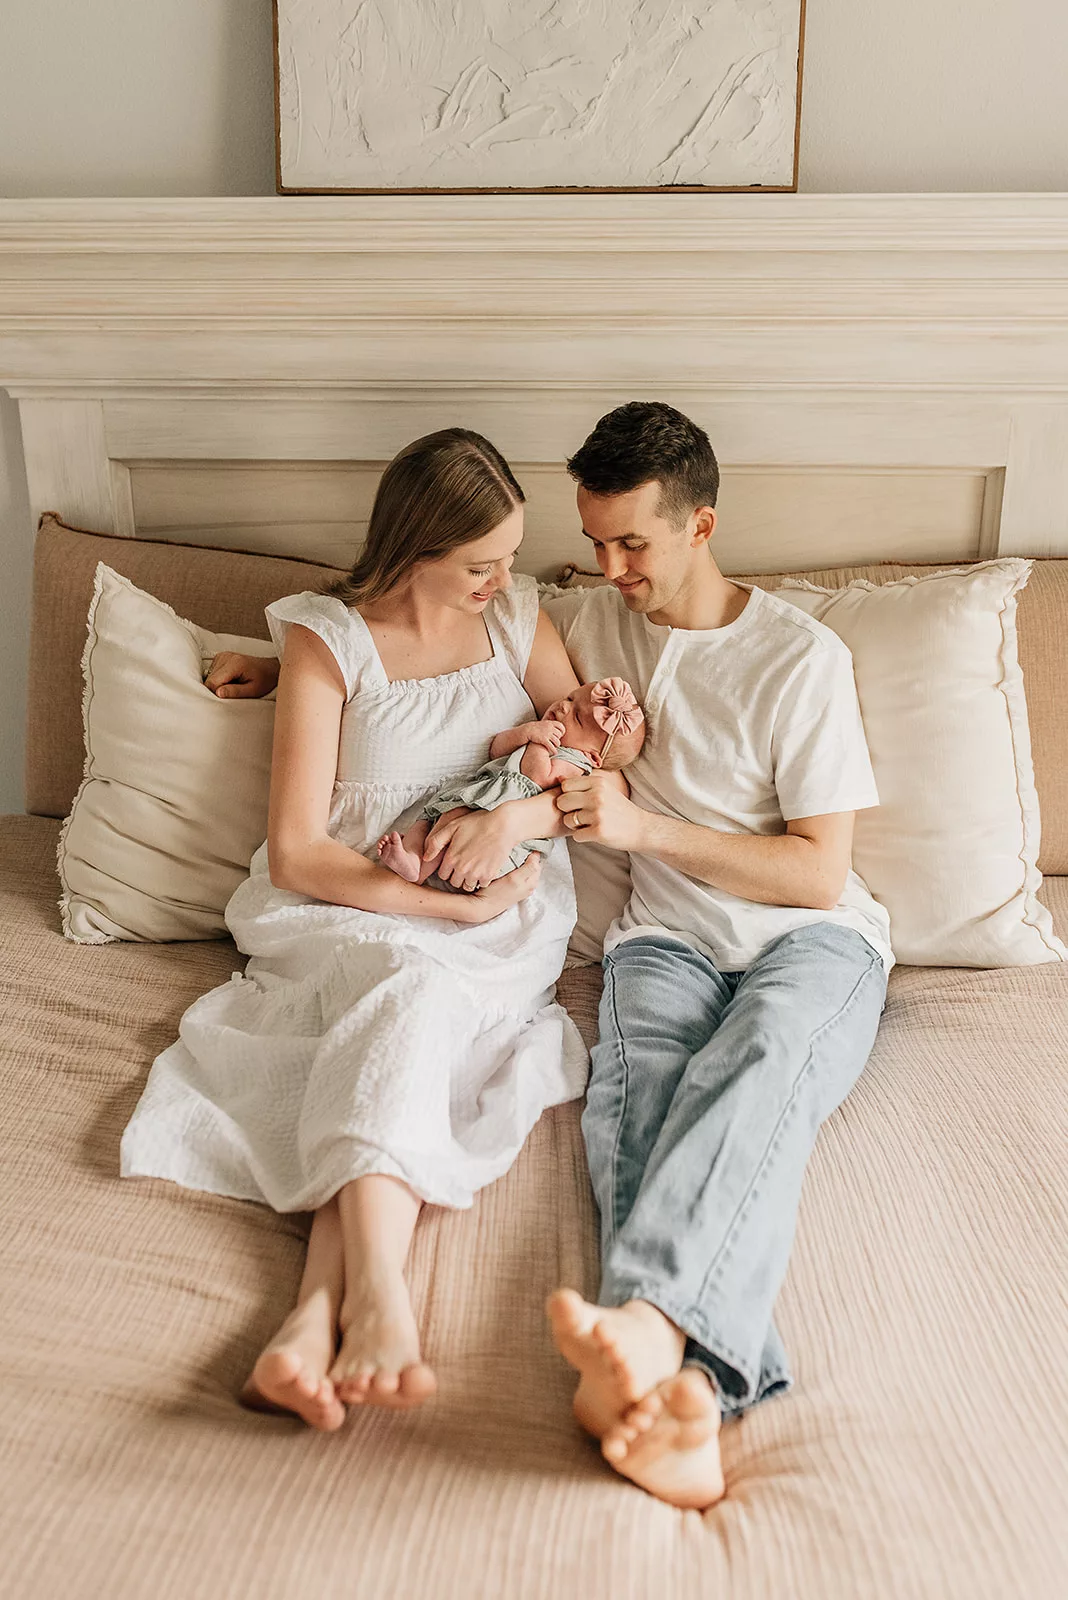 New parents sit together on a bed while they gaze at their newborn baby daughter